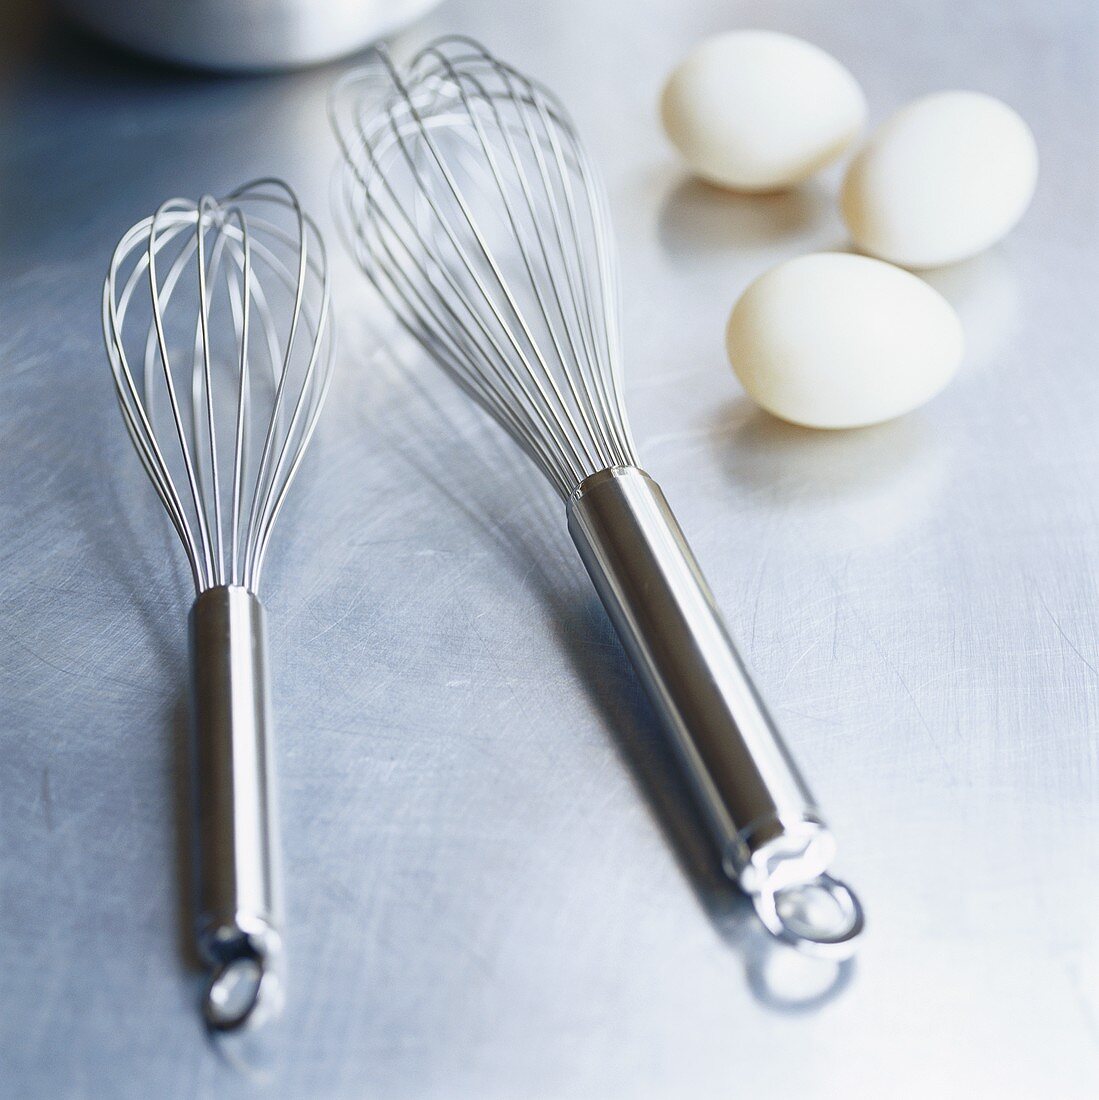 Two whisks and three eggs